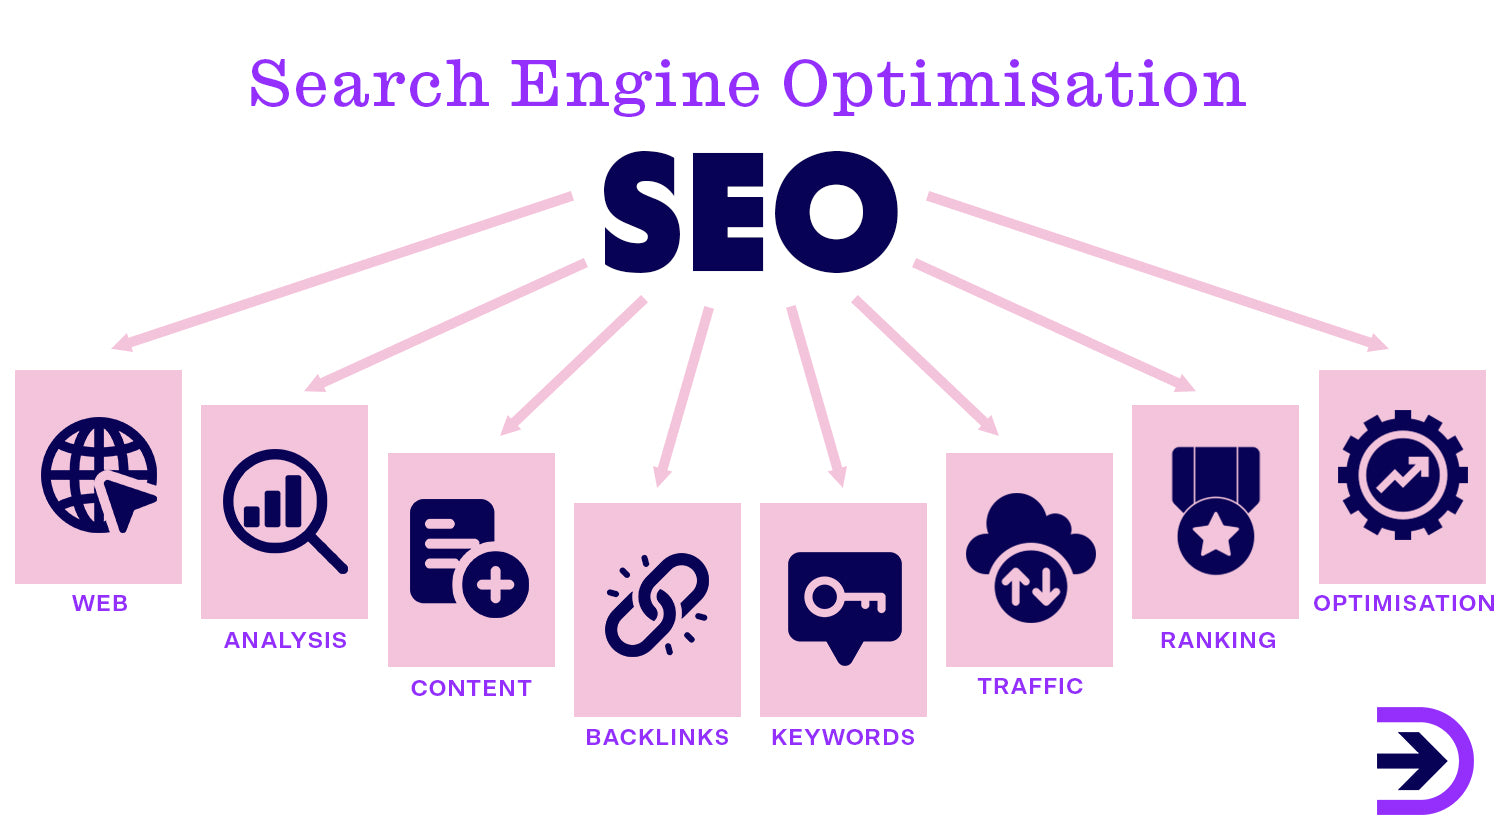 Analysing and evaluating how search engine optimisation can affect your ranking can boost your product's accessibility.